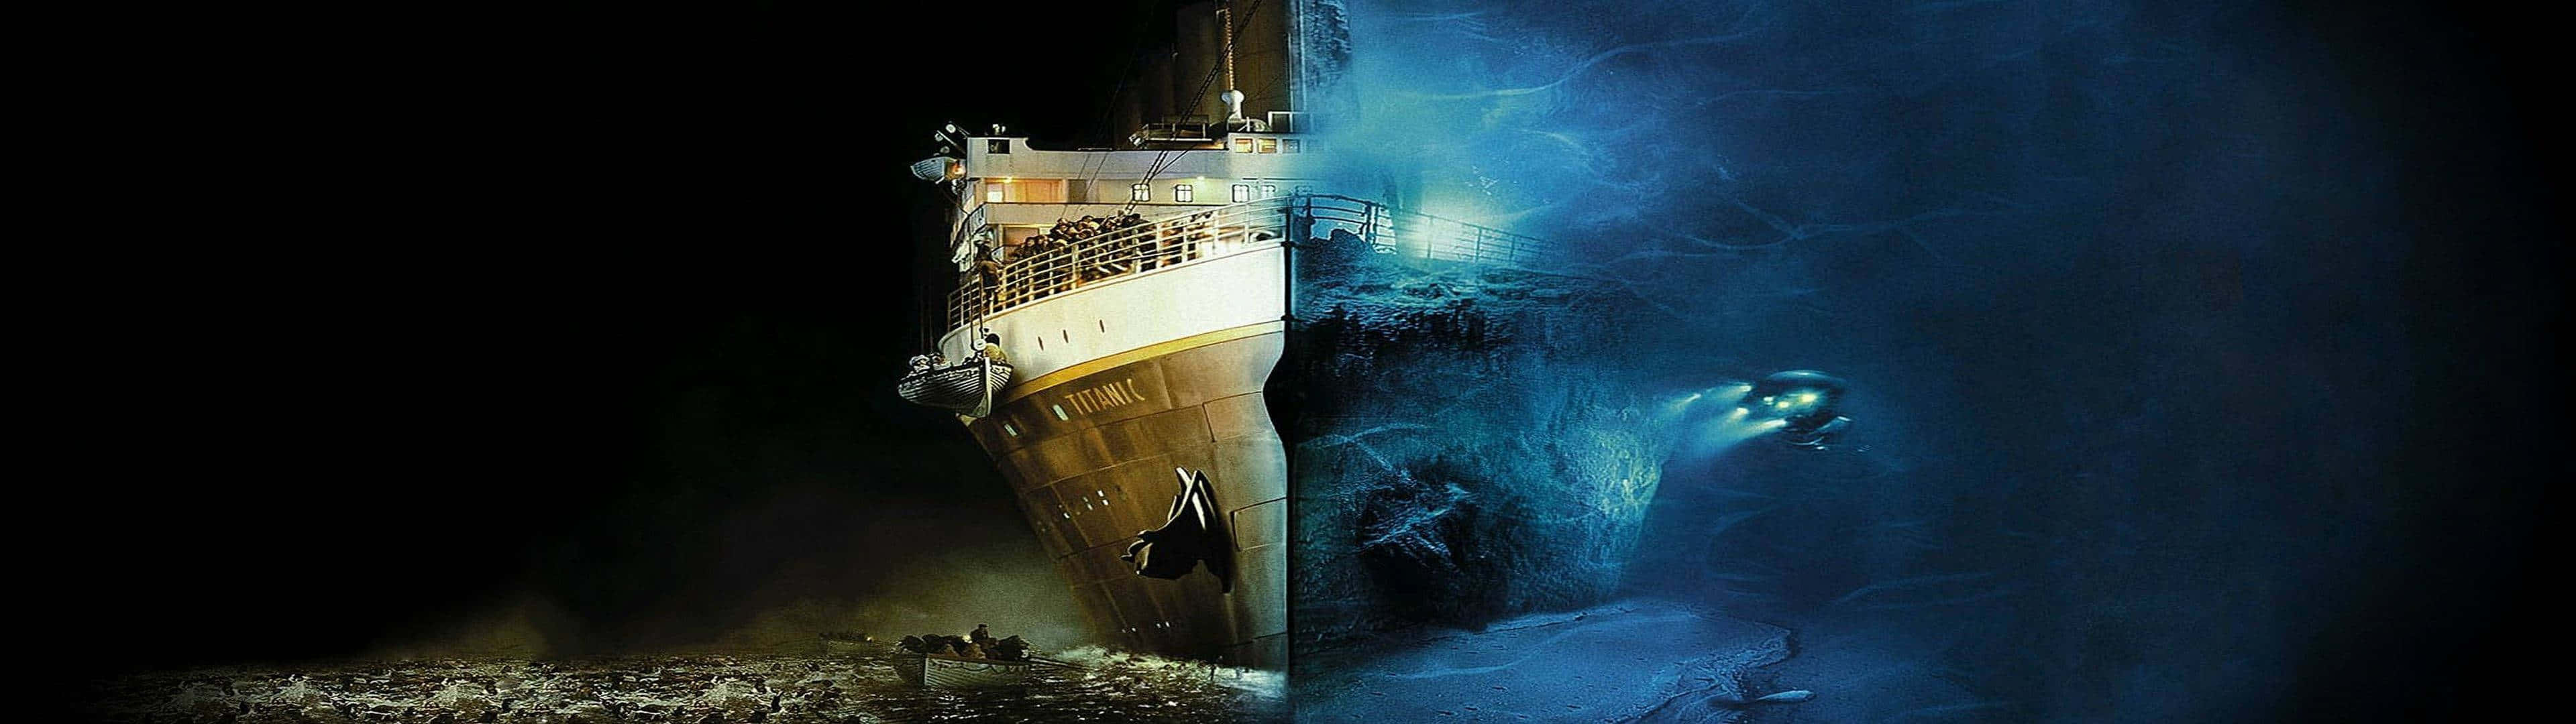 Titanic Movie Poster - Hd Wallpapers